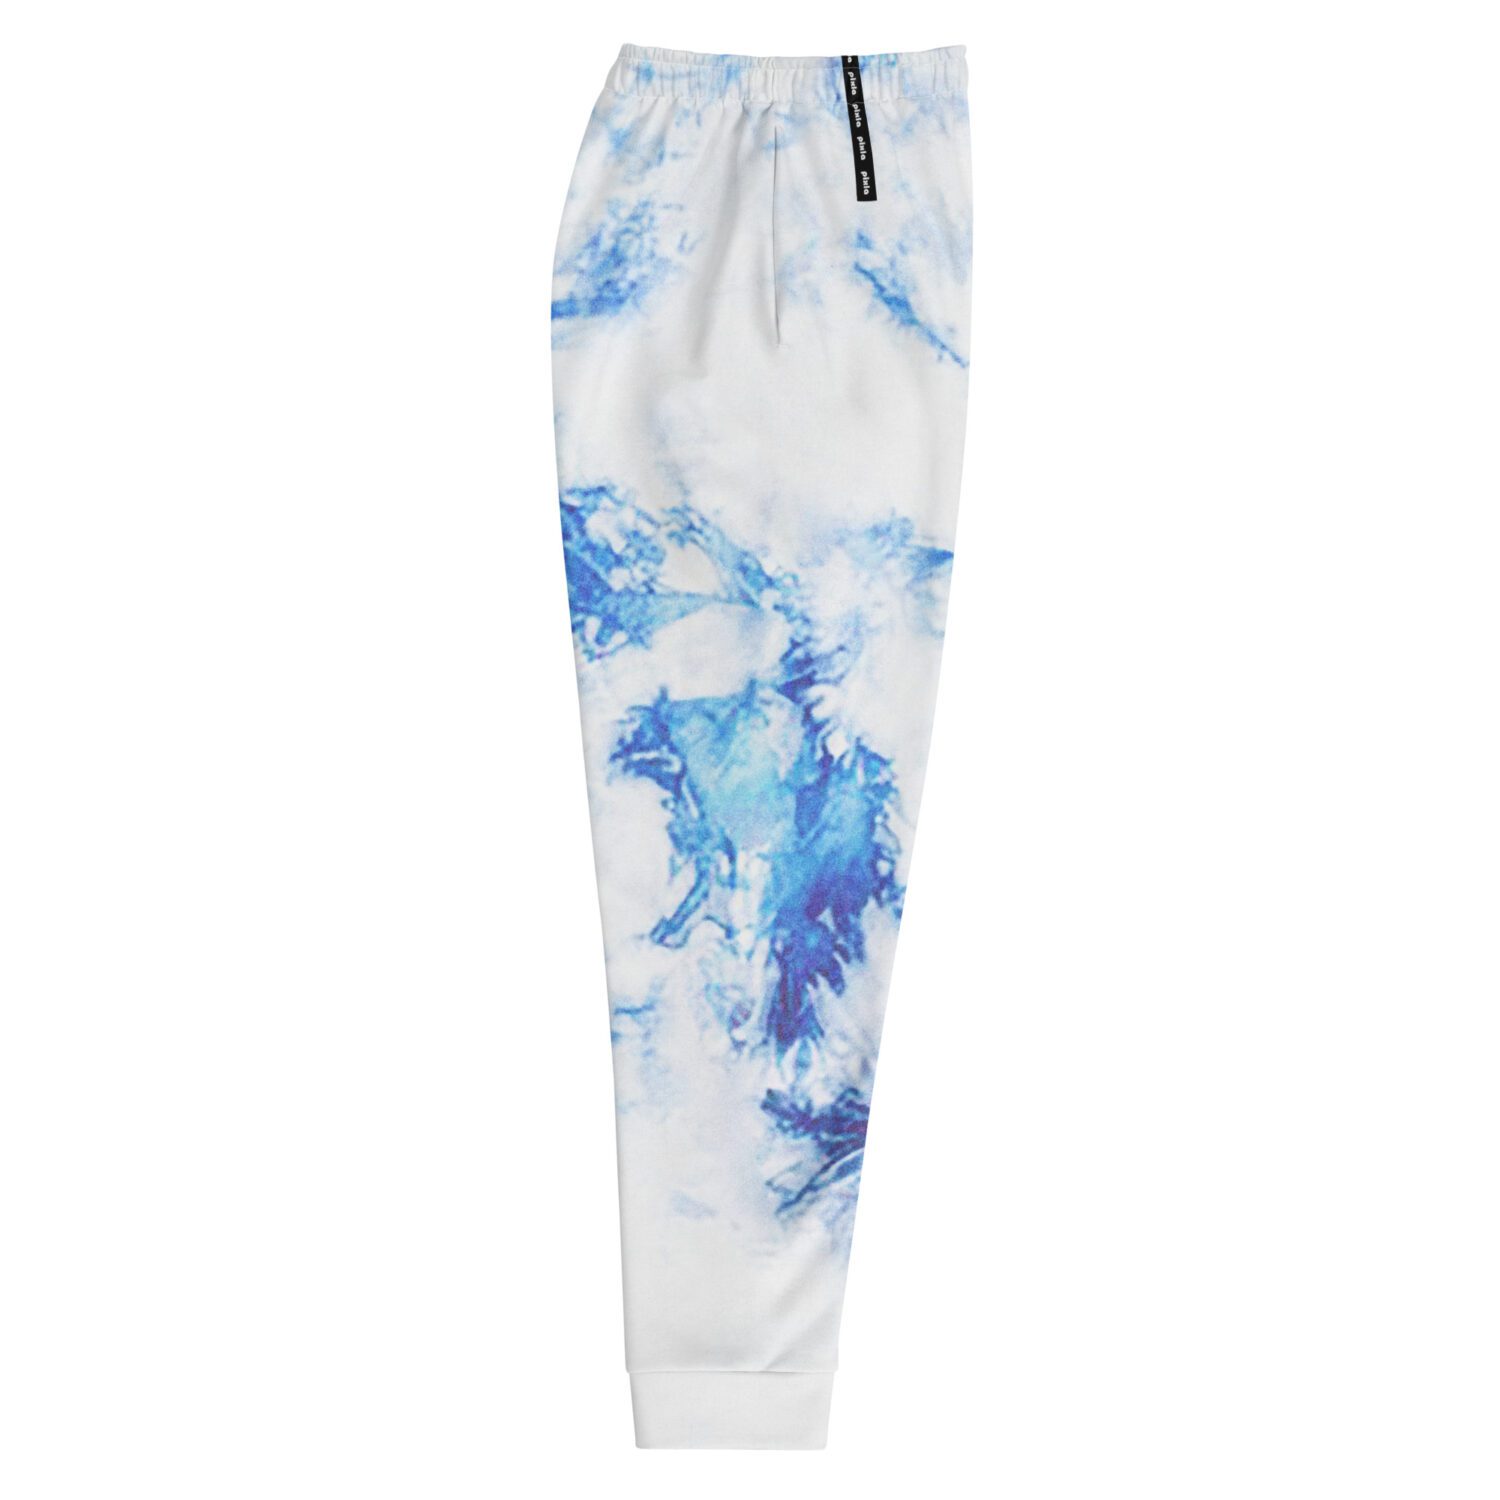 Super comfy slim fit joggers made from a soft cotton blend, these sweatpants feature a vibrant blue and white tie-dye sublimation print all over that won’t fade.